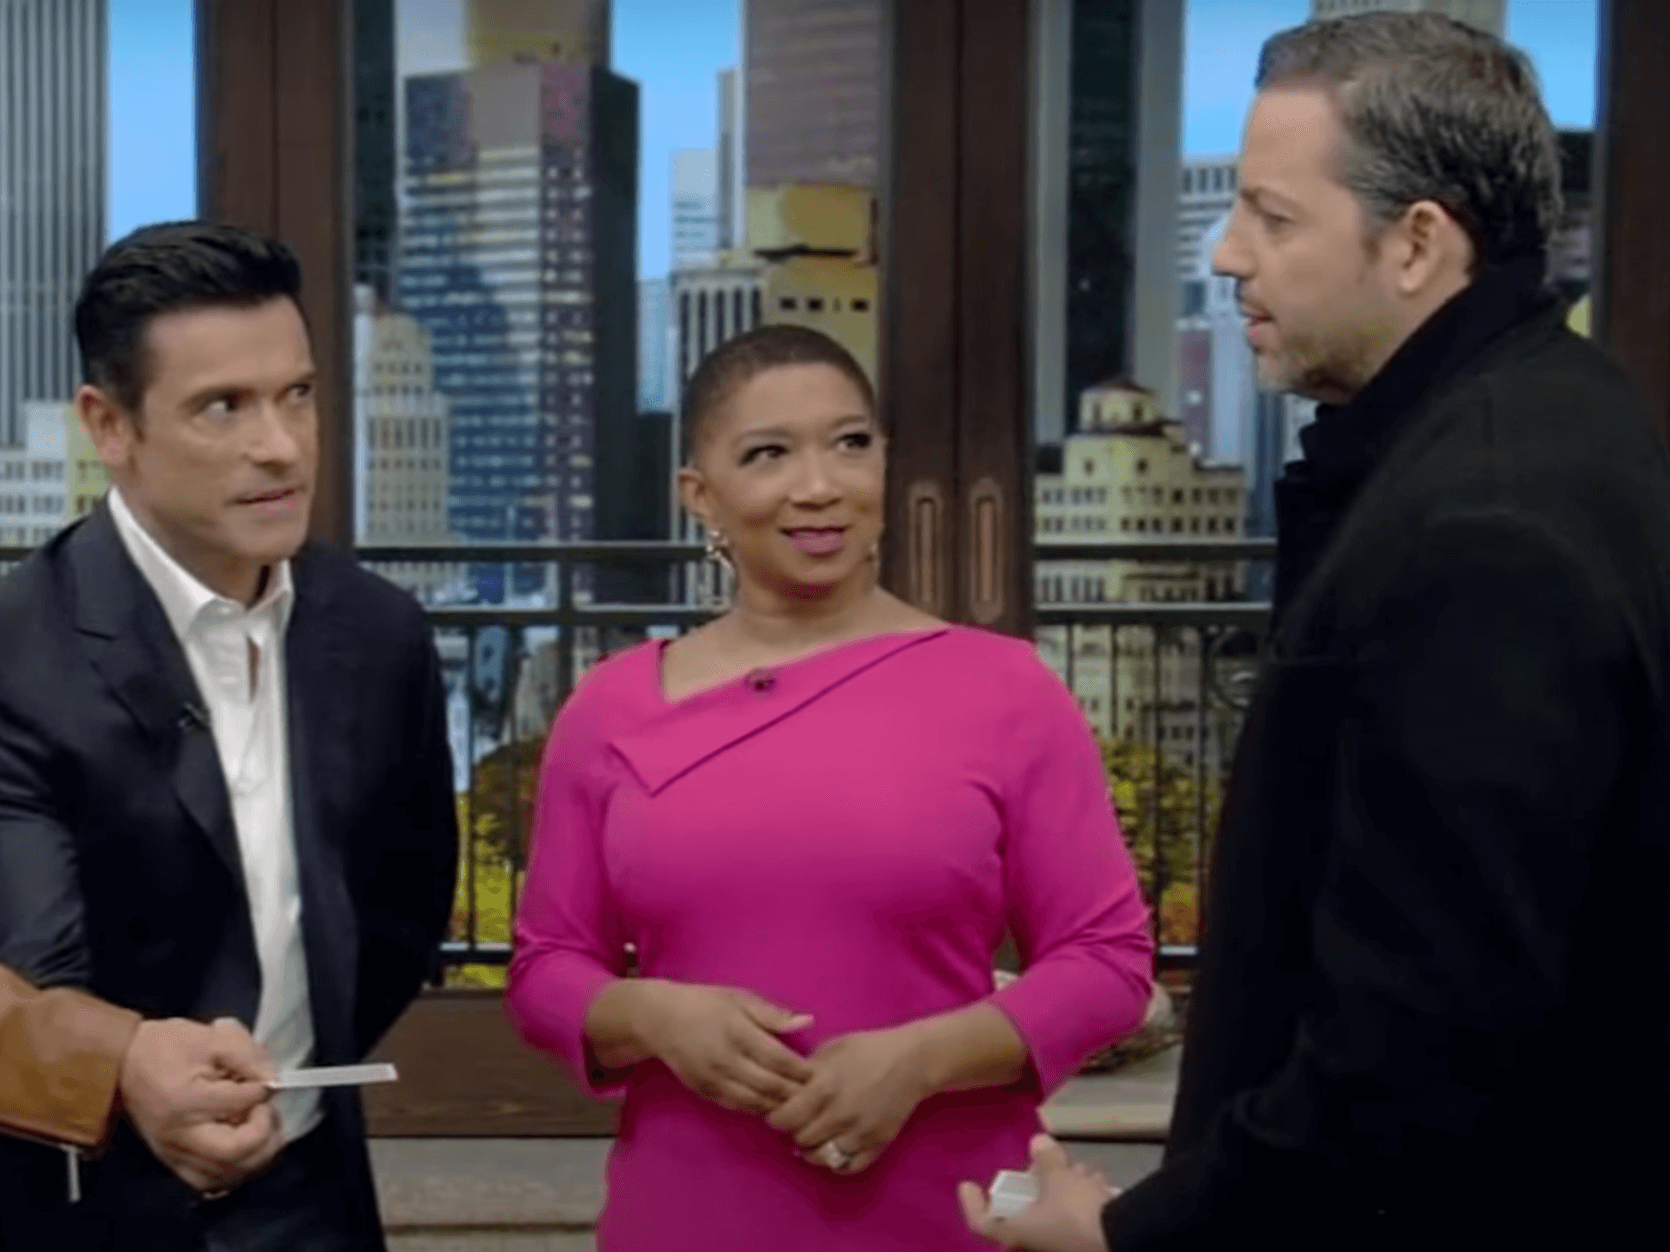 NEW VIDEO: David Blaine on Live with Kelly and Mark